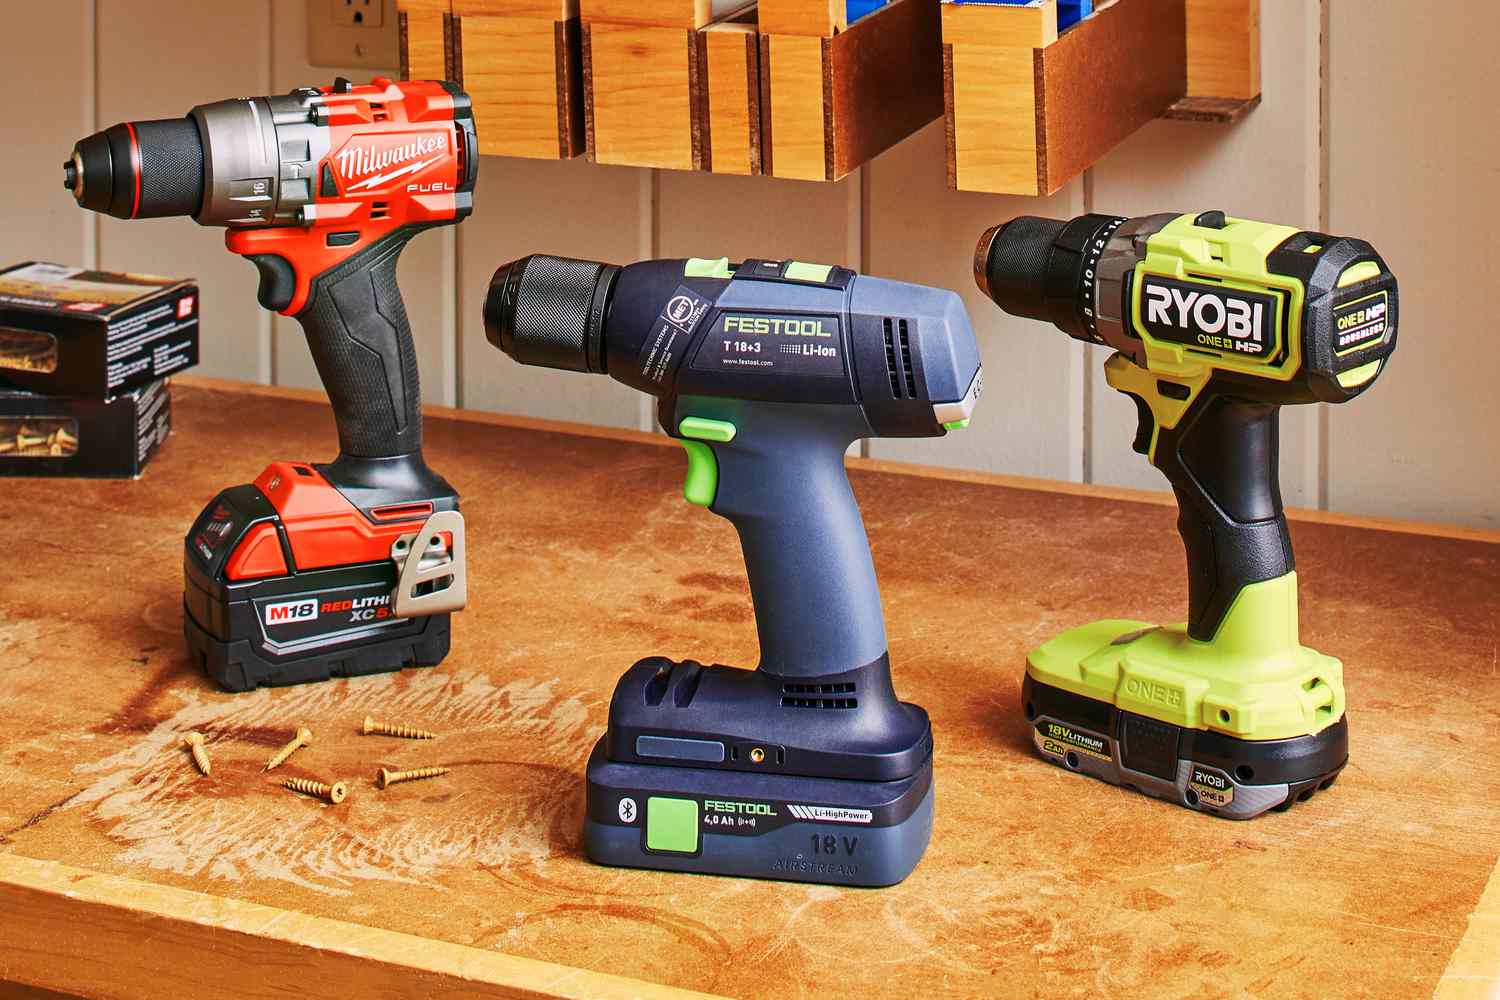 What are the Key Considerations When Selecting Cordless Power Tools for Home Improvement?